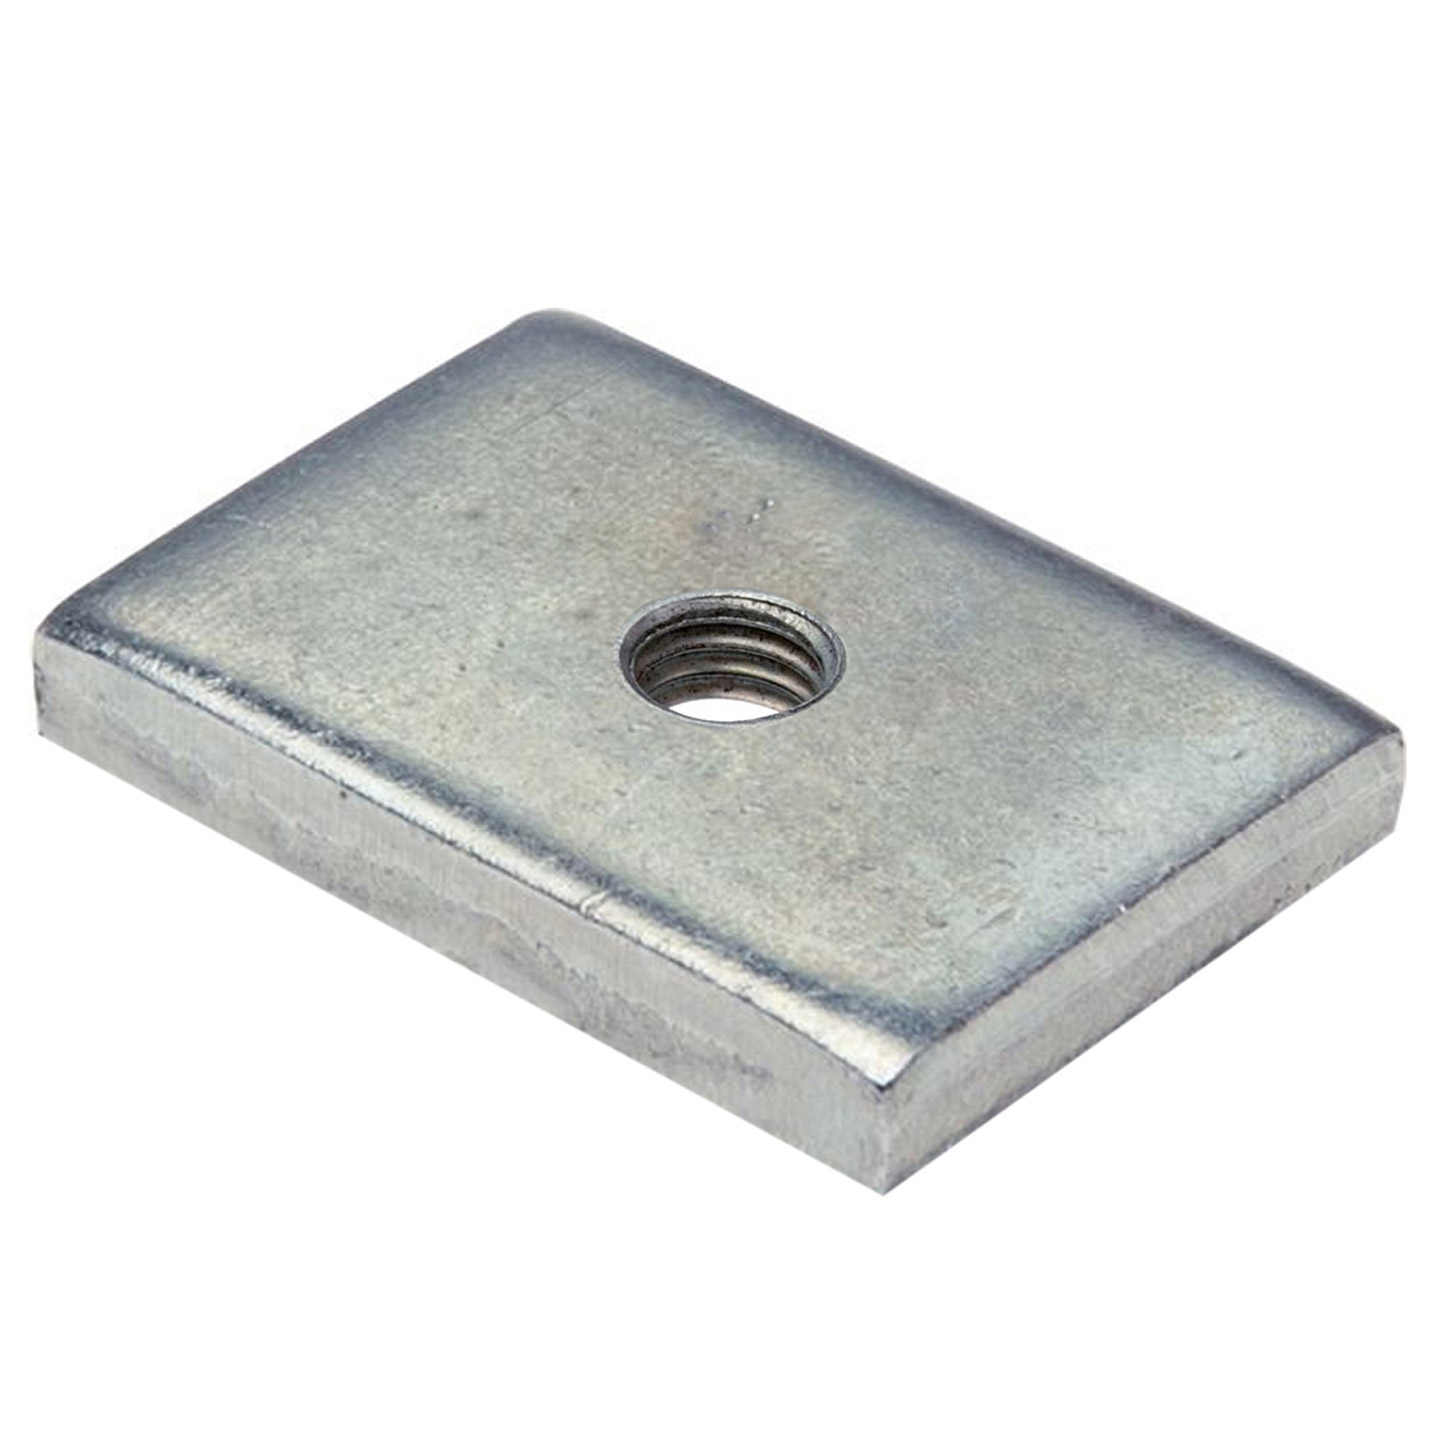 Stainless Steel Plate M8